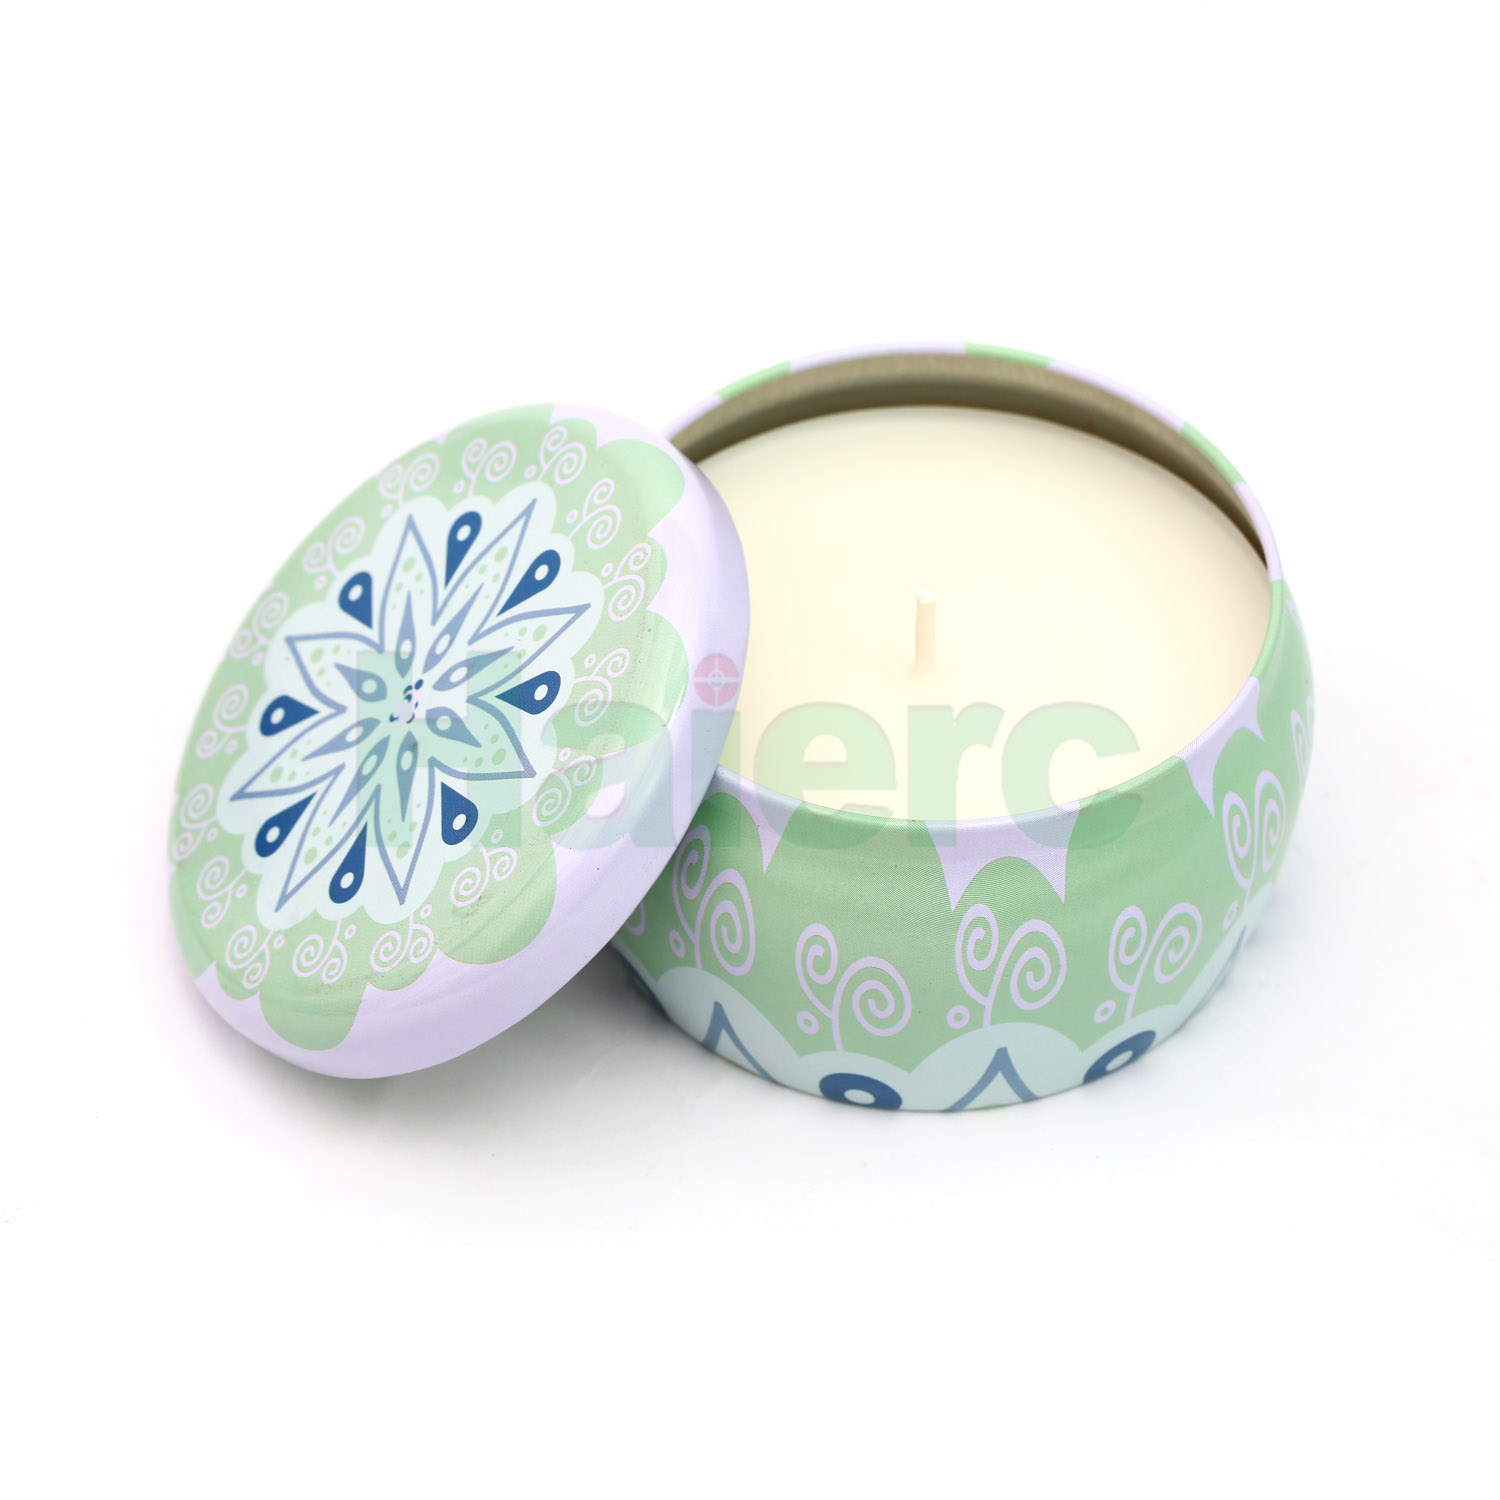 Haierc Bee&Soy Wax Mixed Citronella Mosquito Repellent Candle